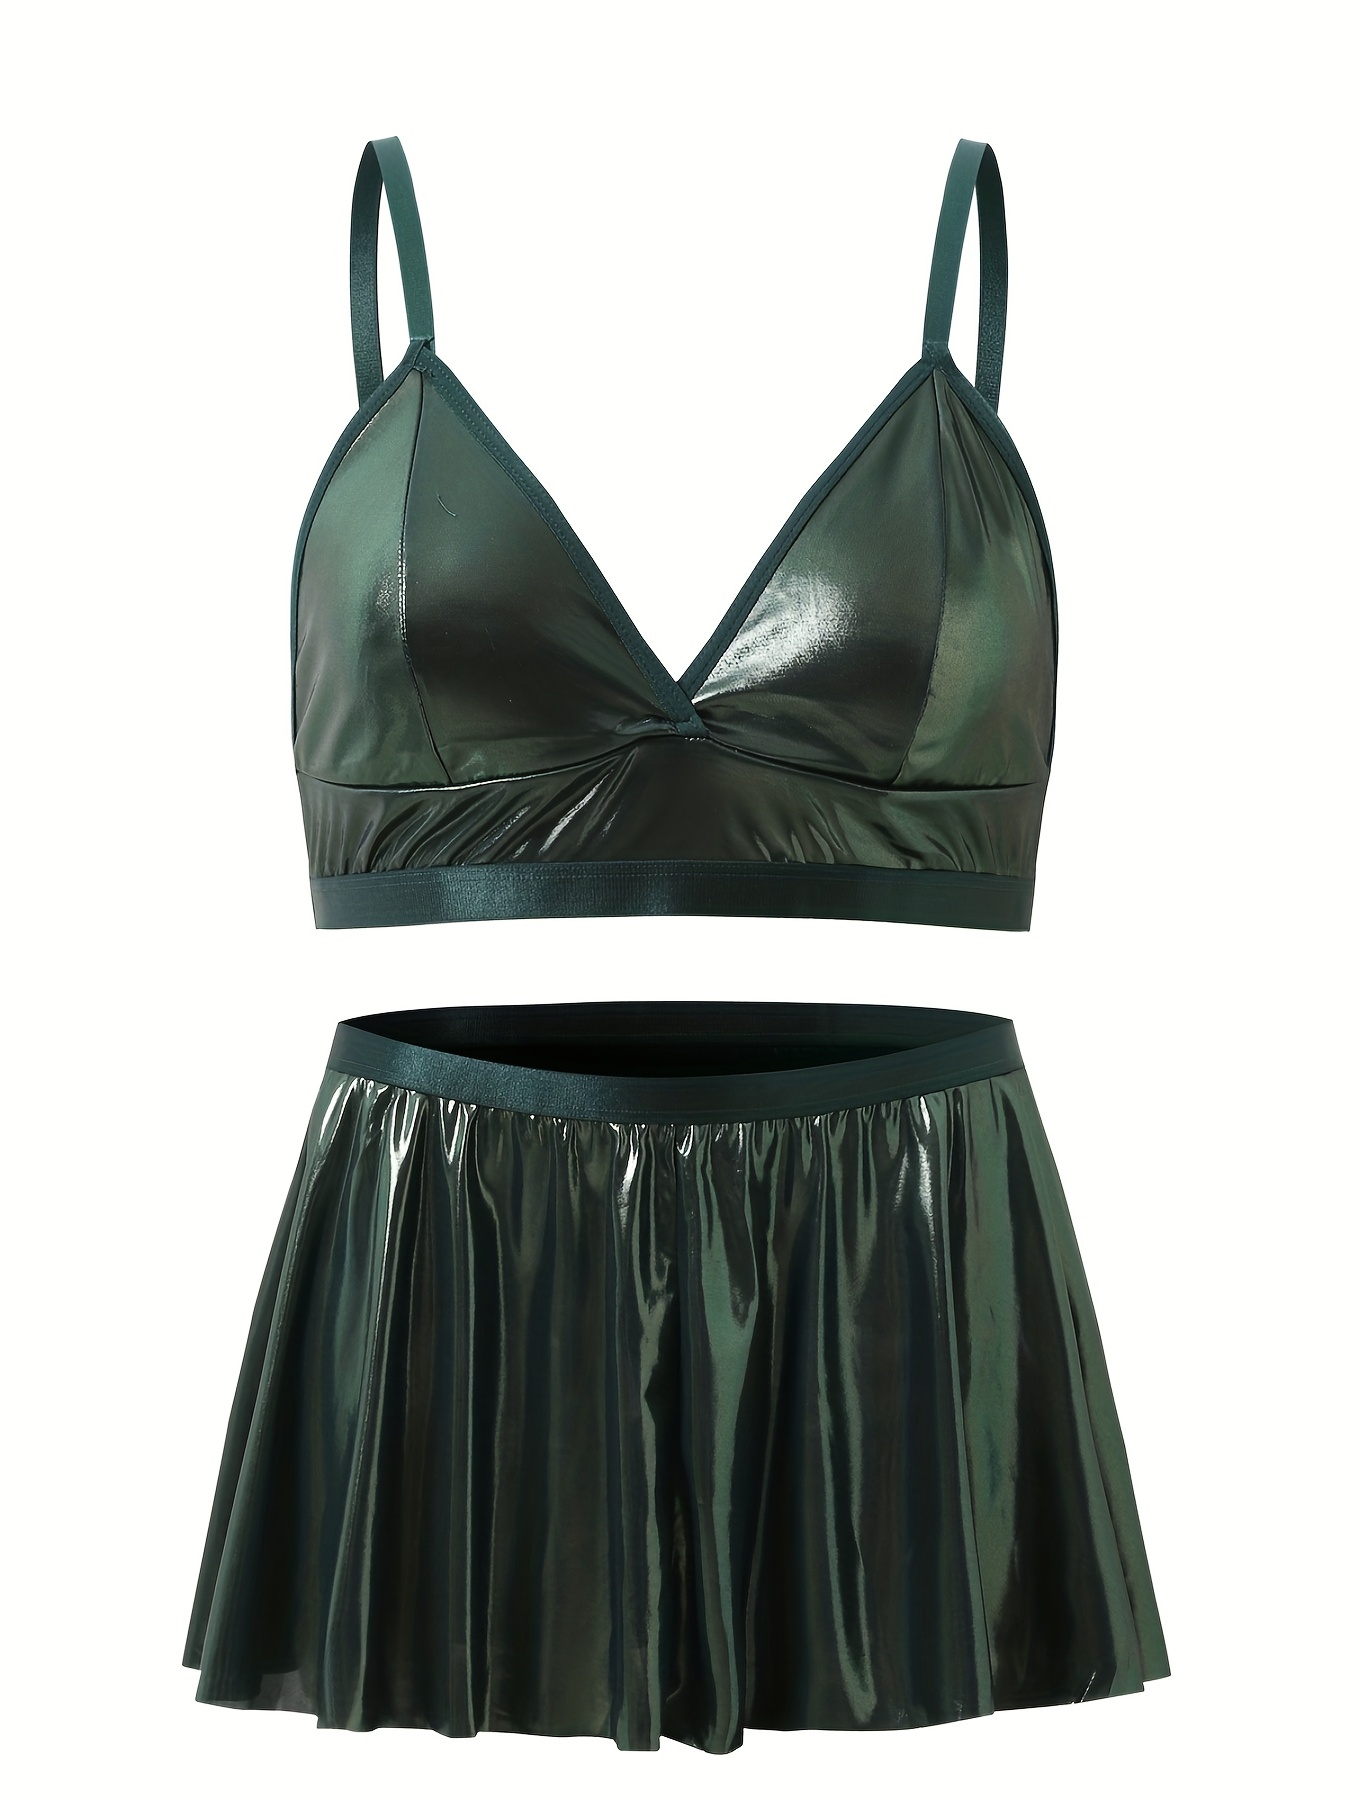 Pigment green faux-leather bralette